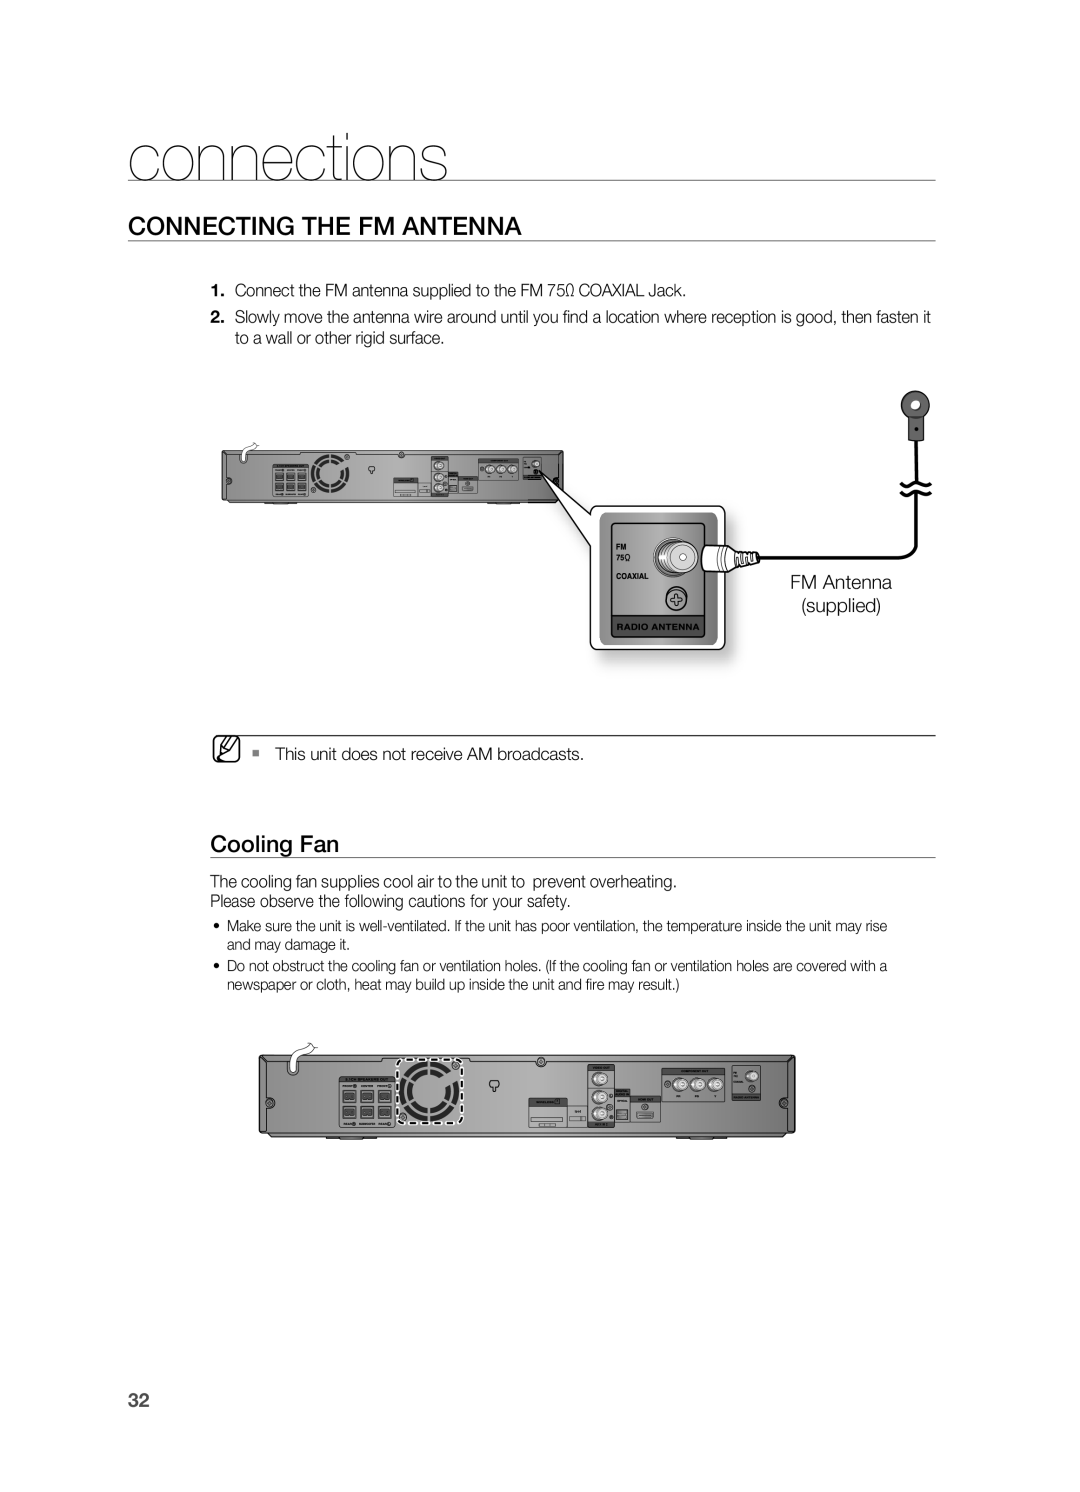 Samsung HT-TZ312, HT-Z310 manual COnnECtinG tHE fm antEnna, Cooling fan, connections 